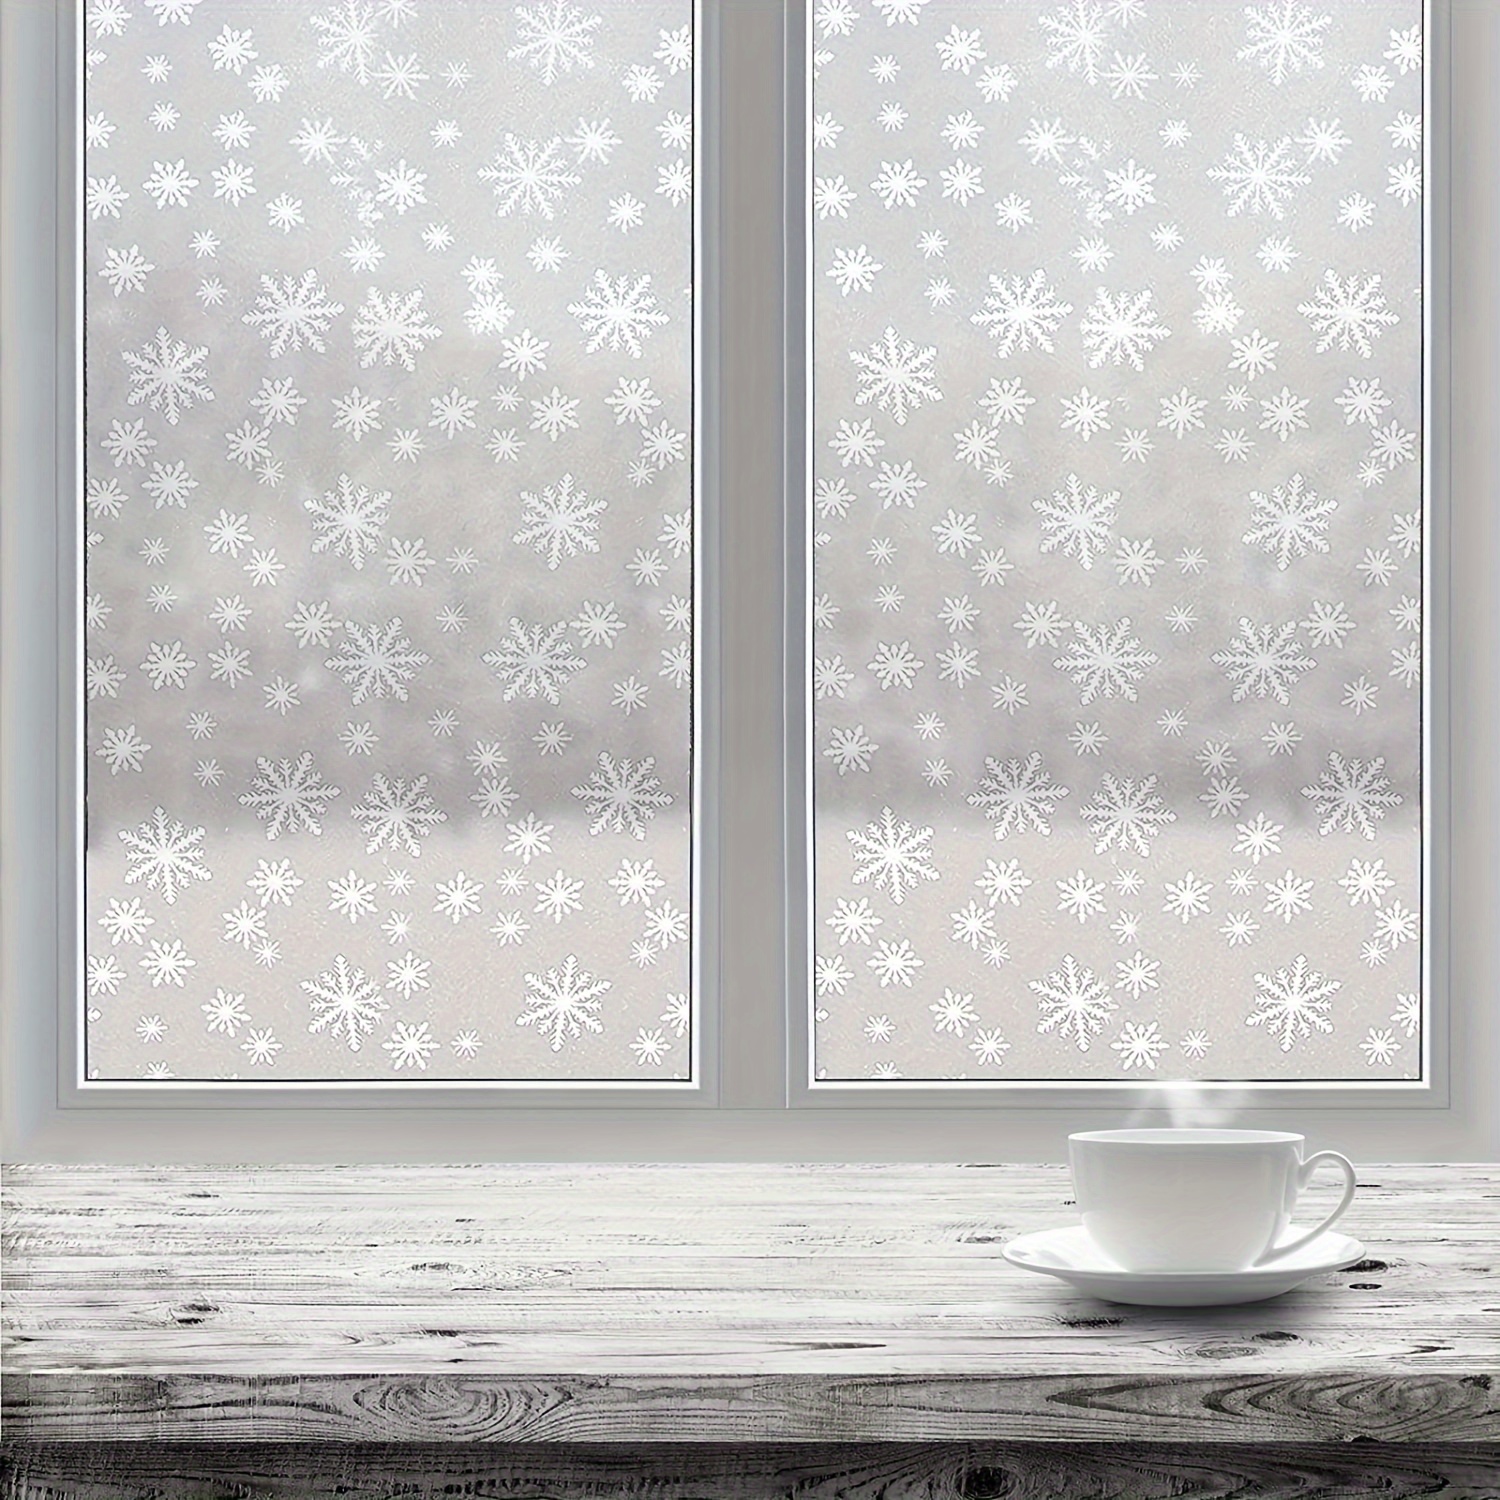 White Snowflakes on Frosted Glass